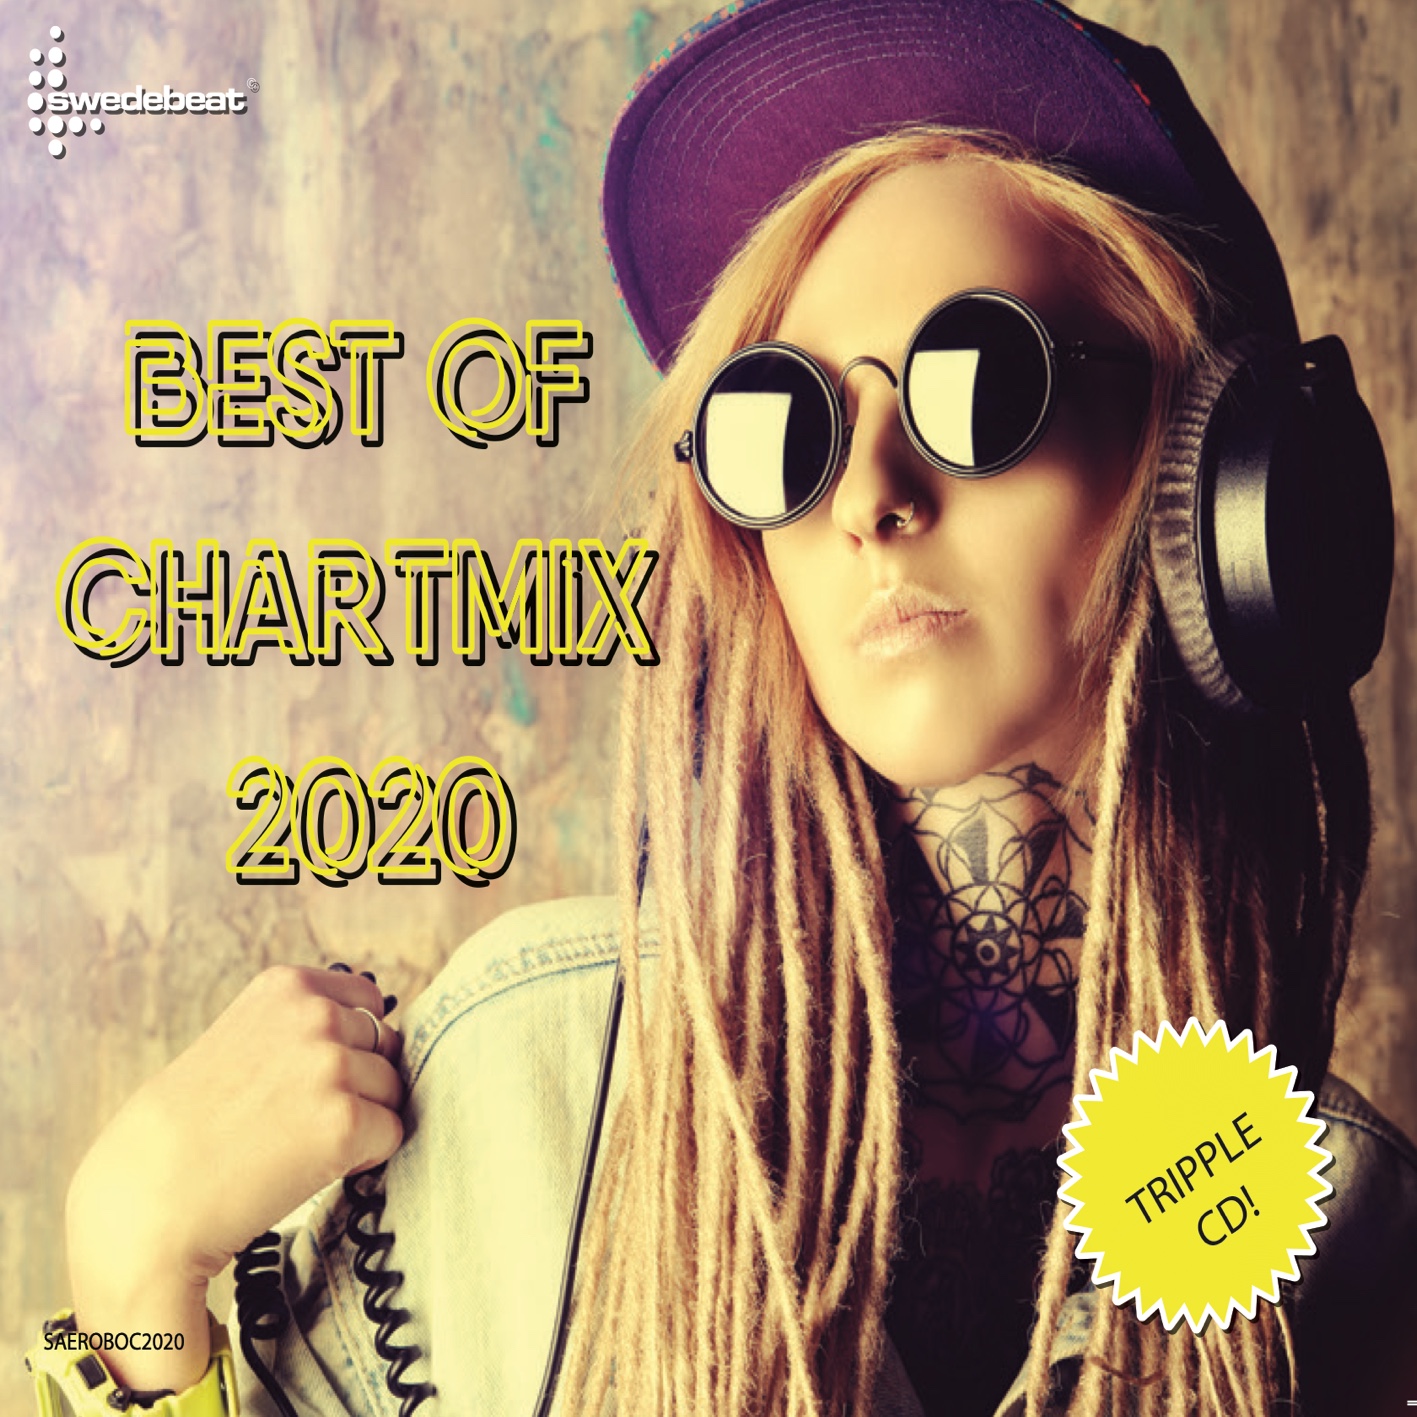 Best-of-Chartmix-2020-Cover